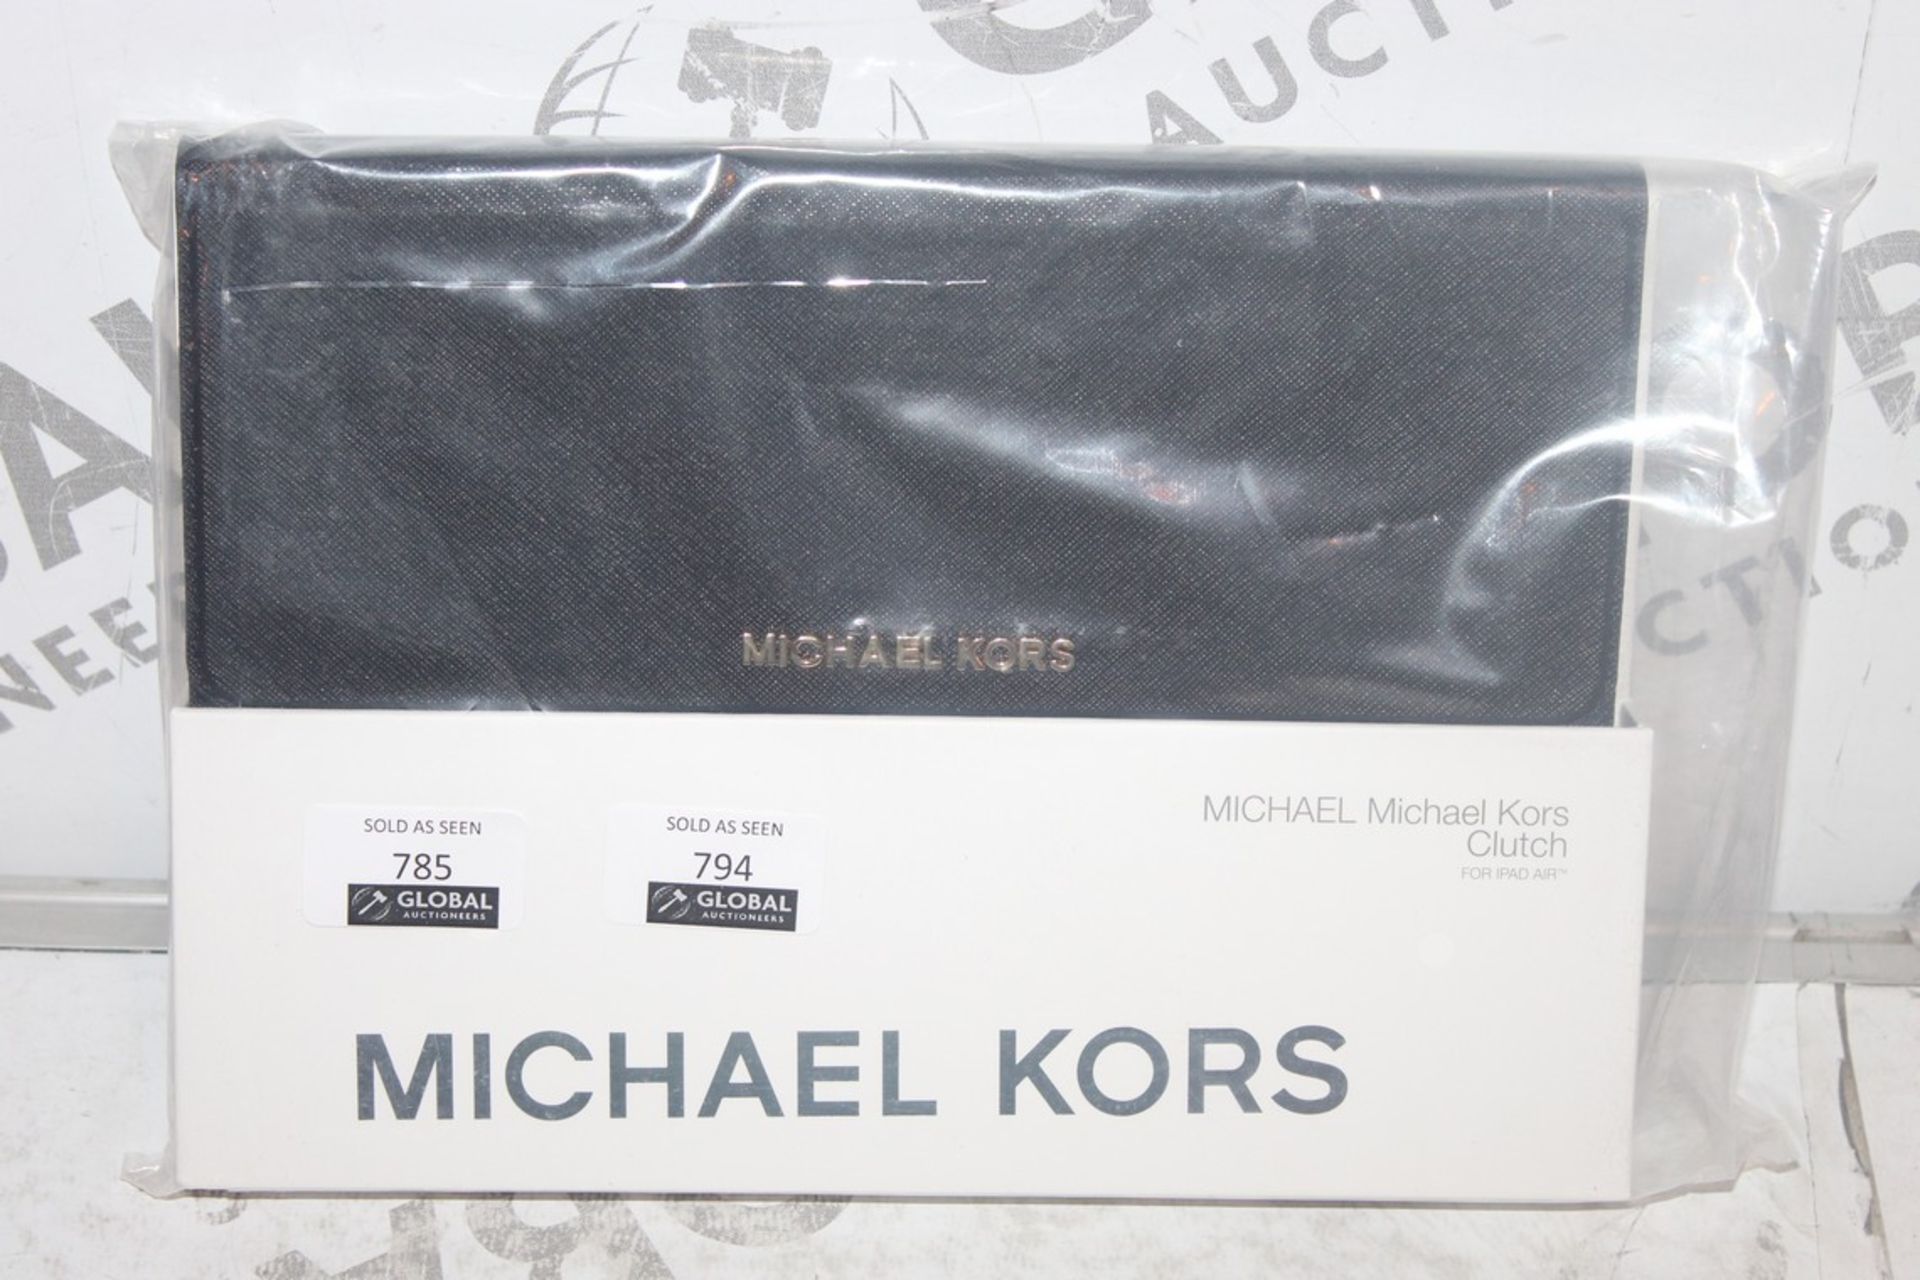 Lot to Contain 2 Brand New Michael Kors iPad Air Clutch Cases Combined RRP £90